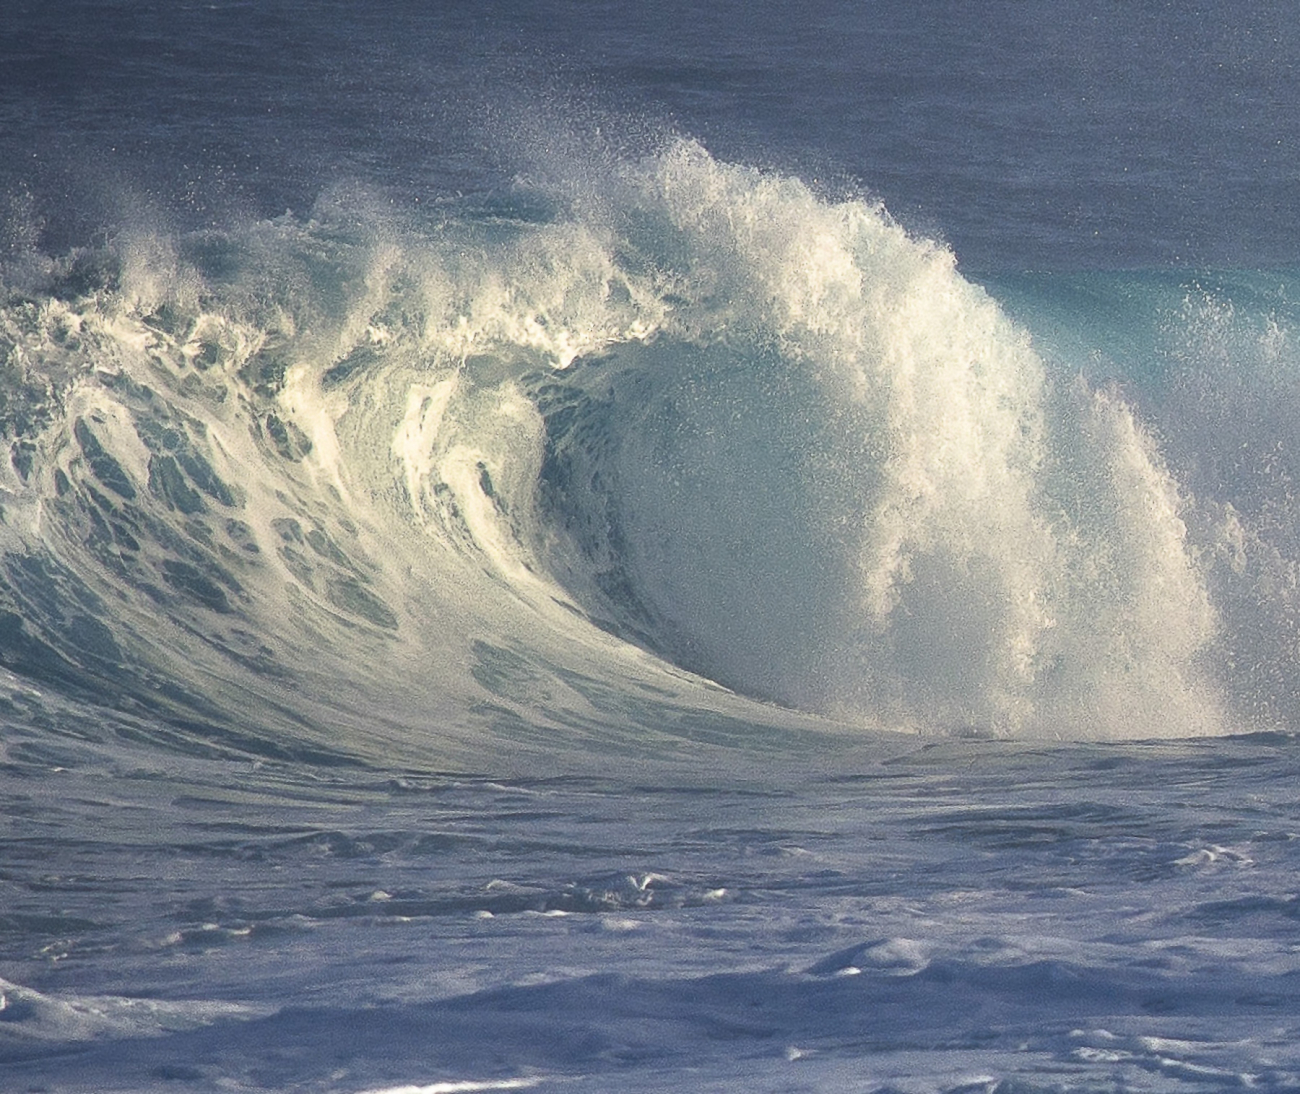 Ocean swell from a winter storm far to the north thunders ashore as hazardoussurf